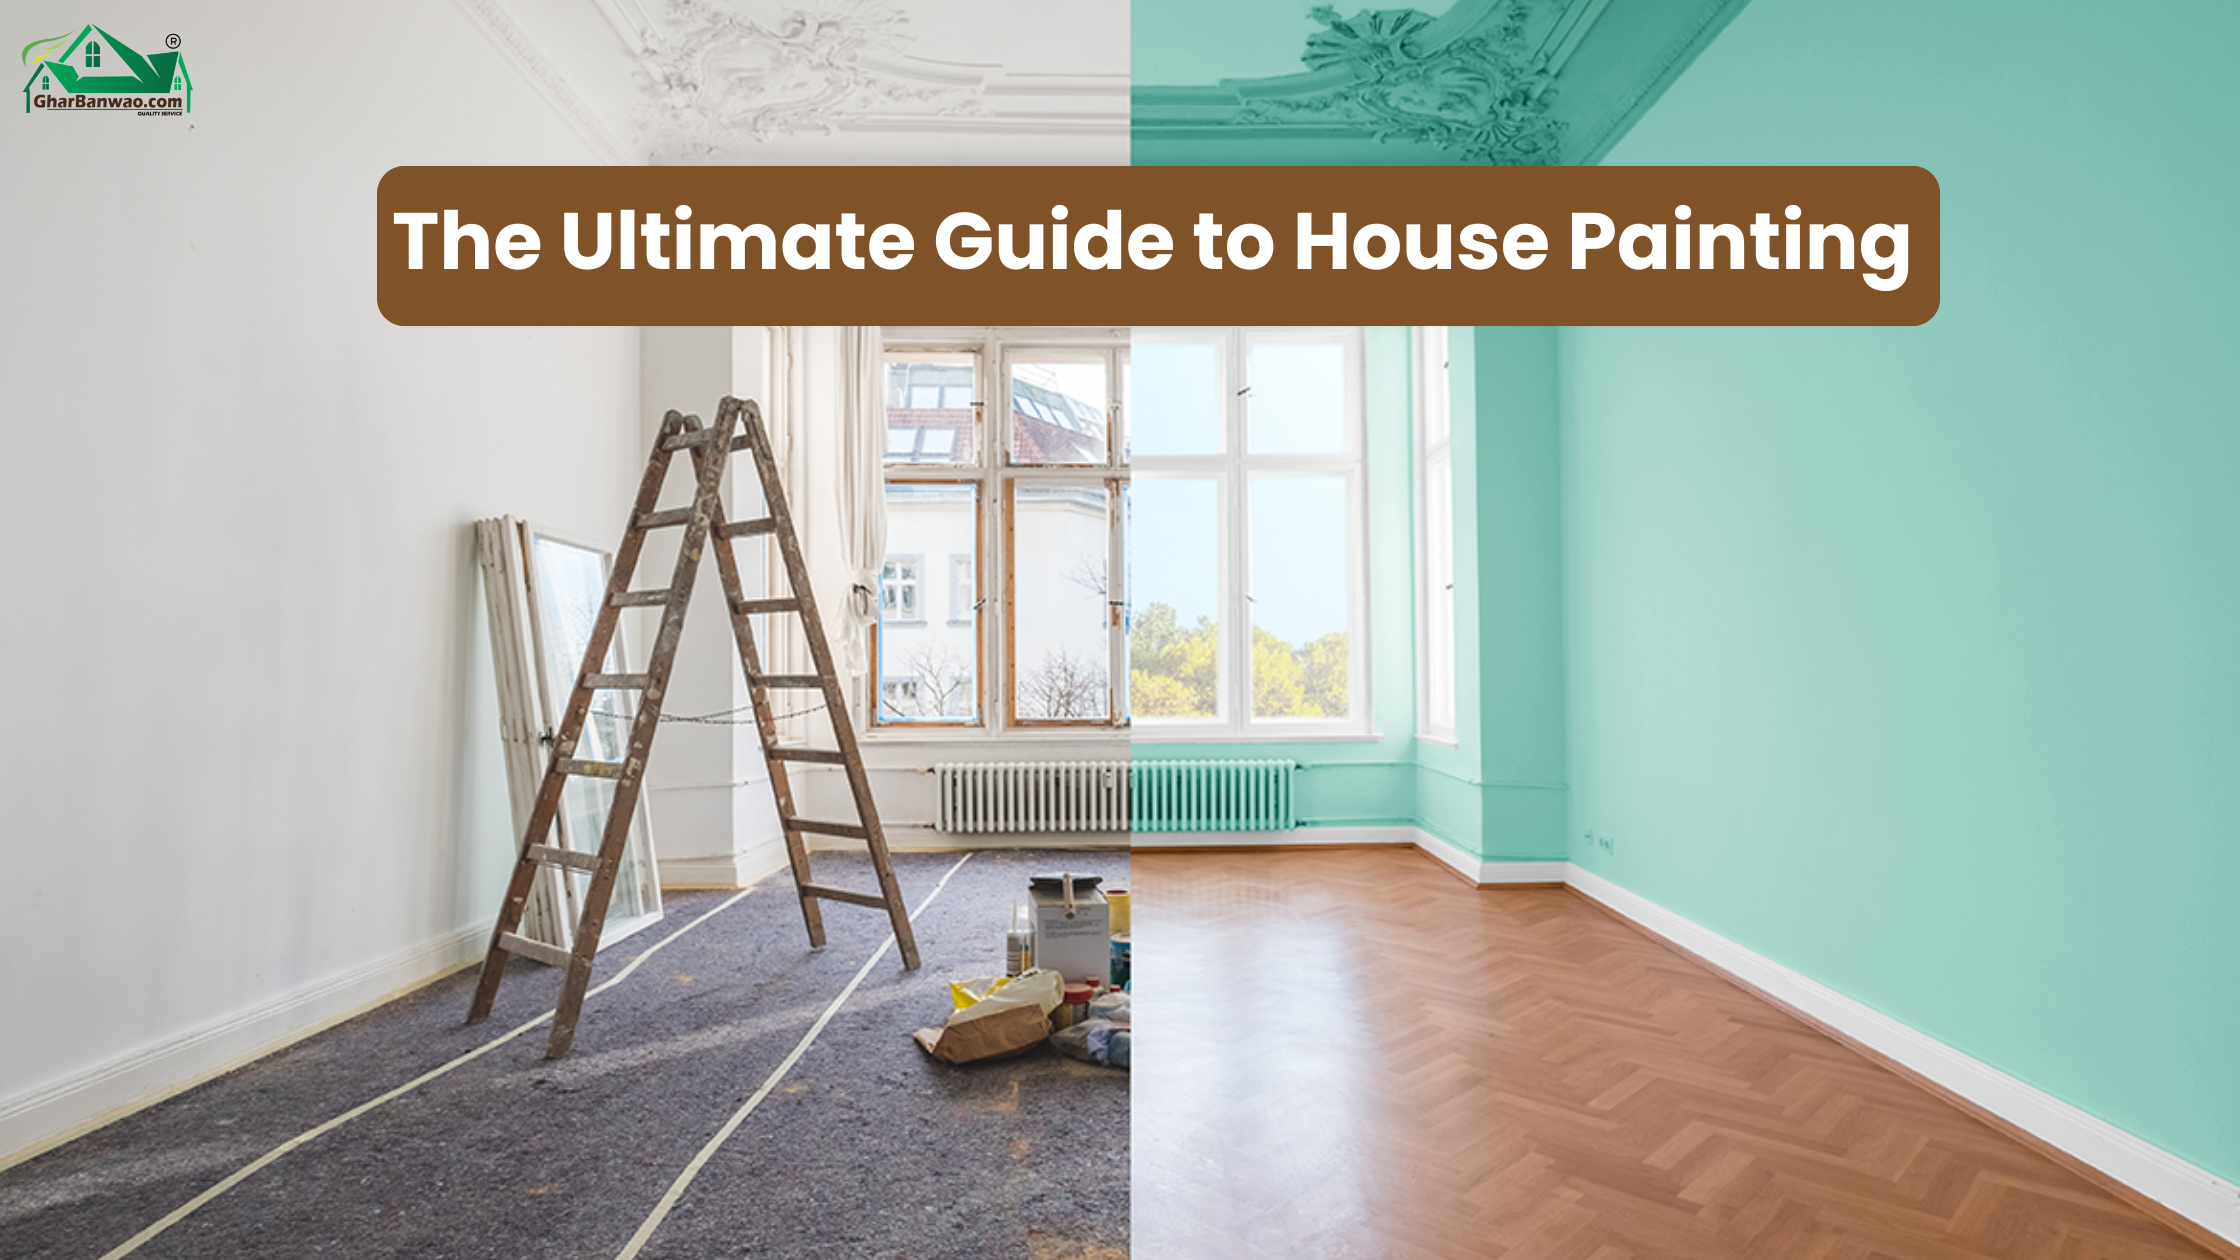 The Ultimate Guide to House Painting